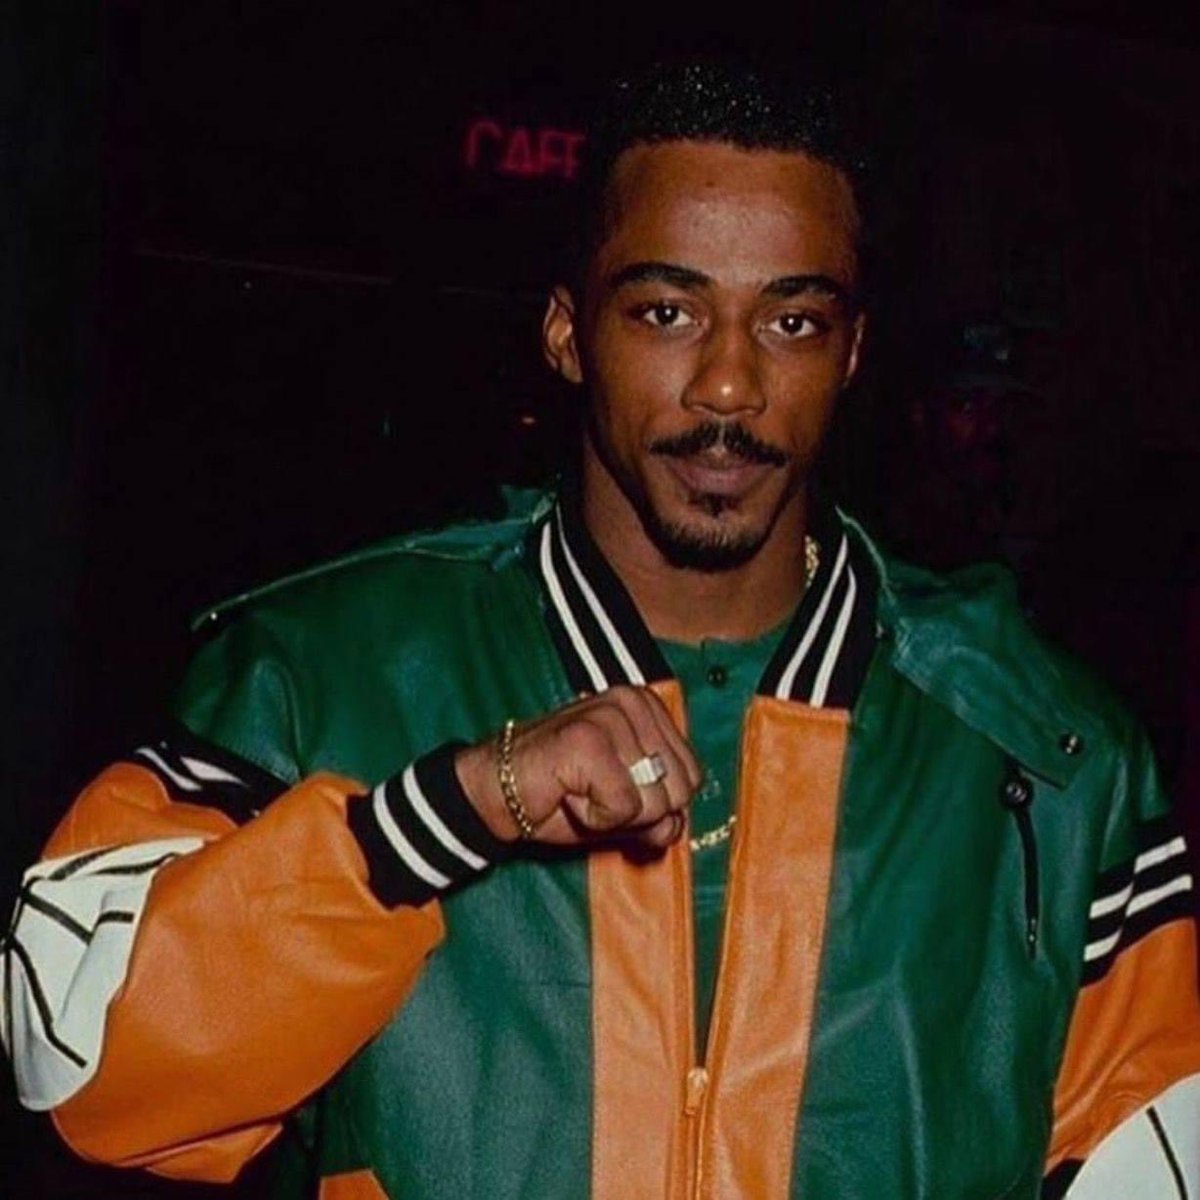 The Stone Cold Gentleman! We wish you a Happy and Blessed Belated Birthday! 😍🥰🥳🎉❤

@RalphTresvant 

#newedition #ne4lifers #ralphtresvant #jgsroses